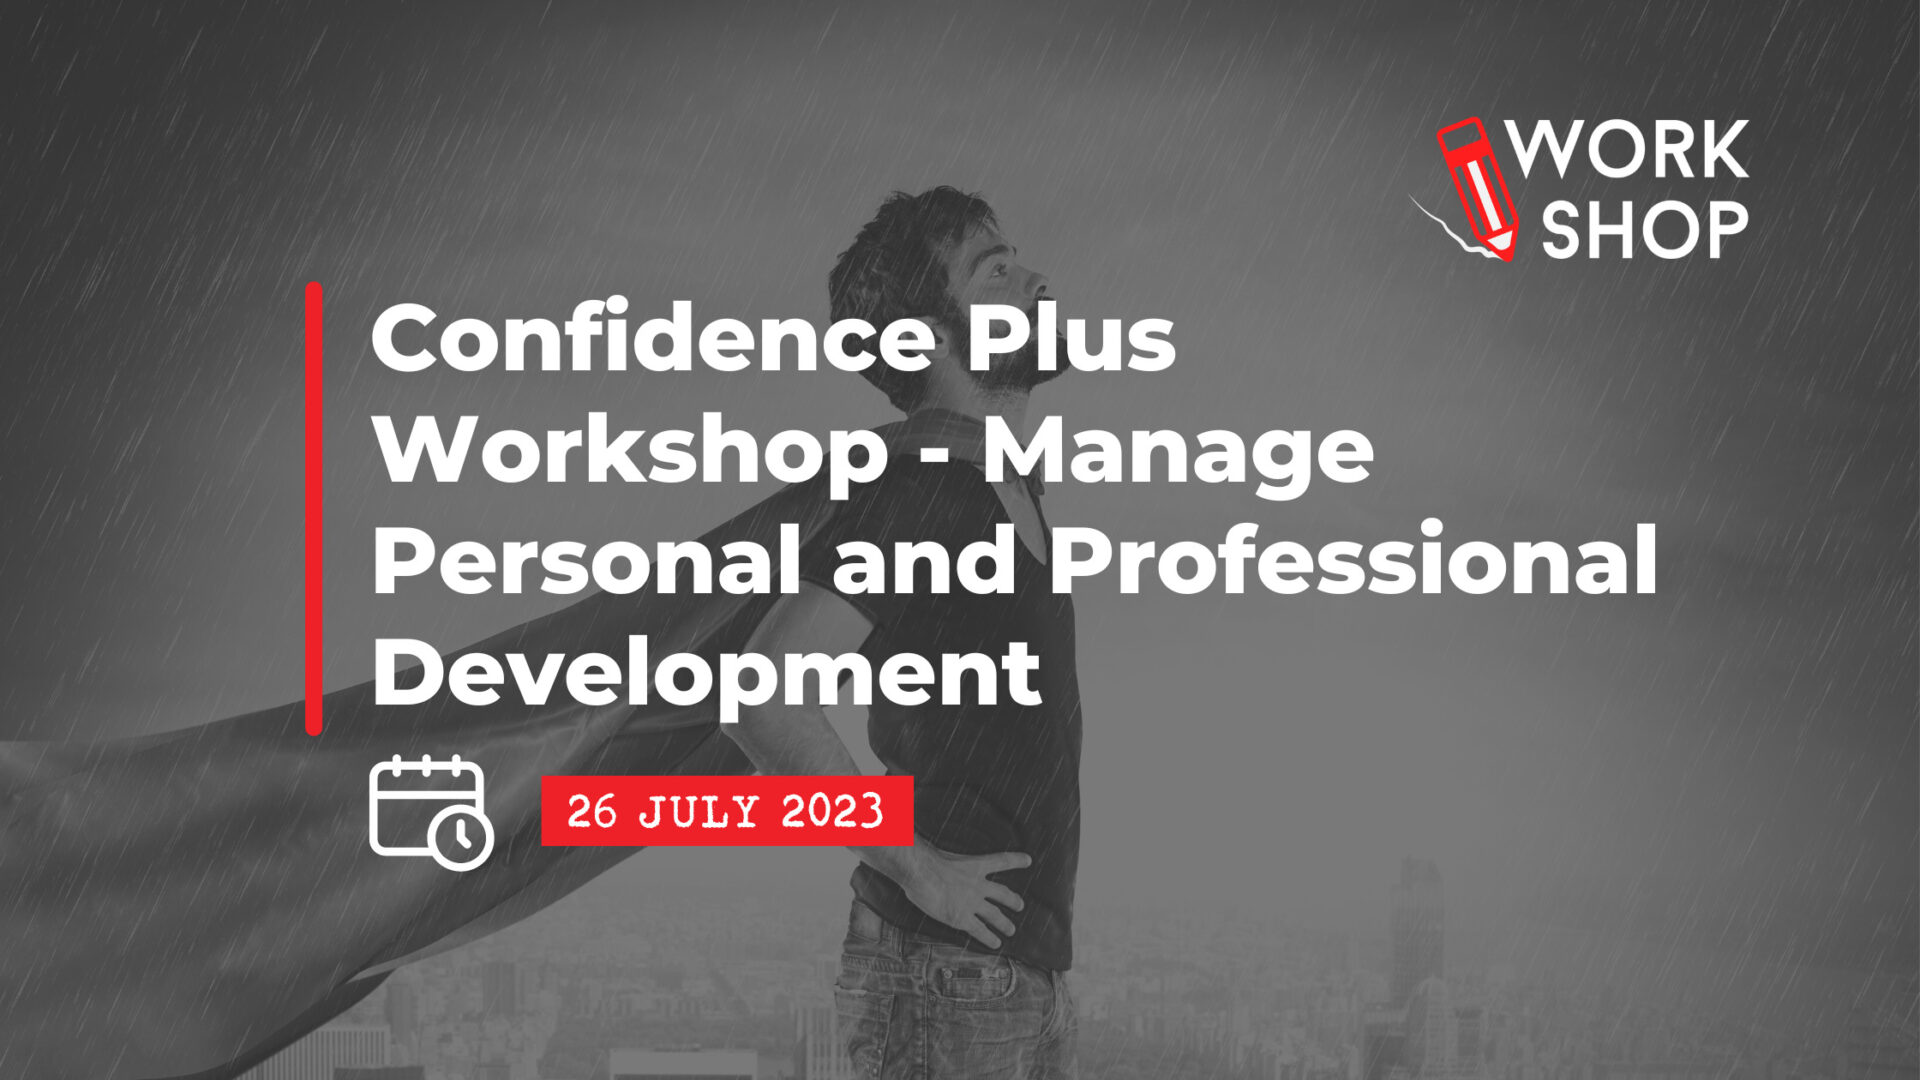 26 July 2023: Confidence Plus Workshop – Manage Personal and Professional Development